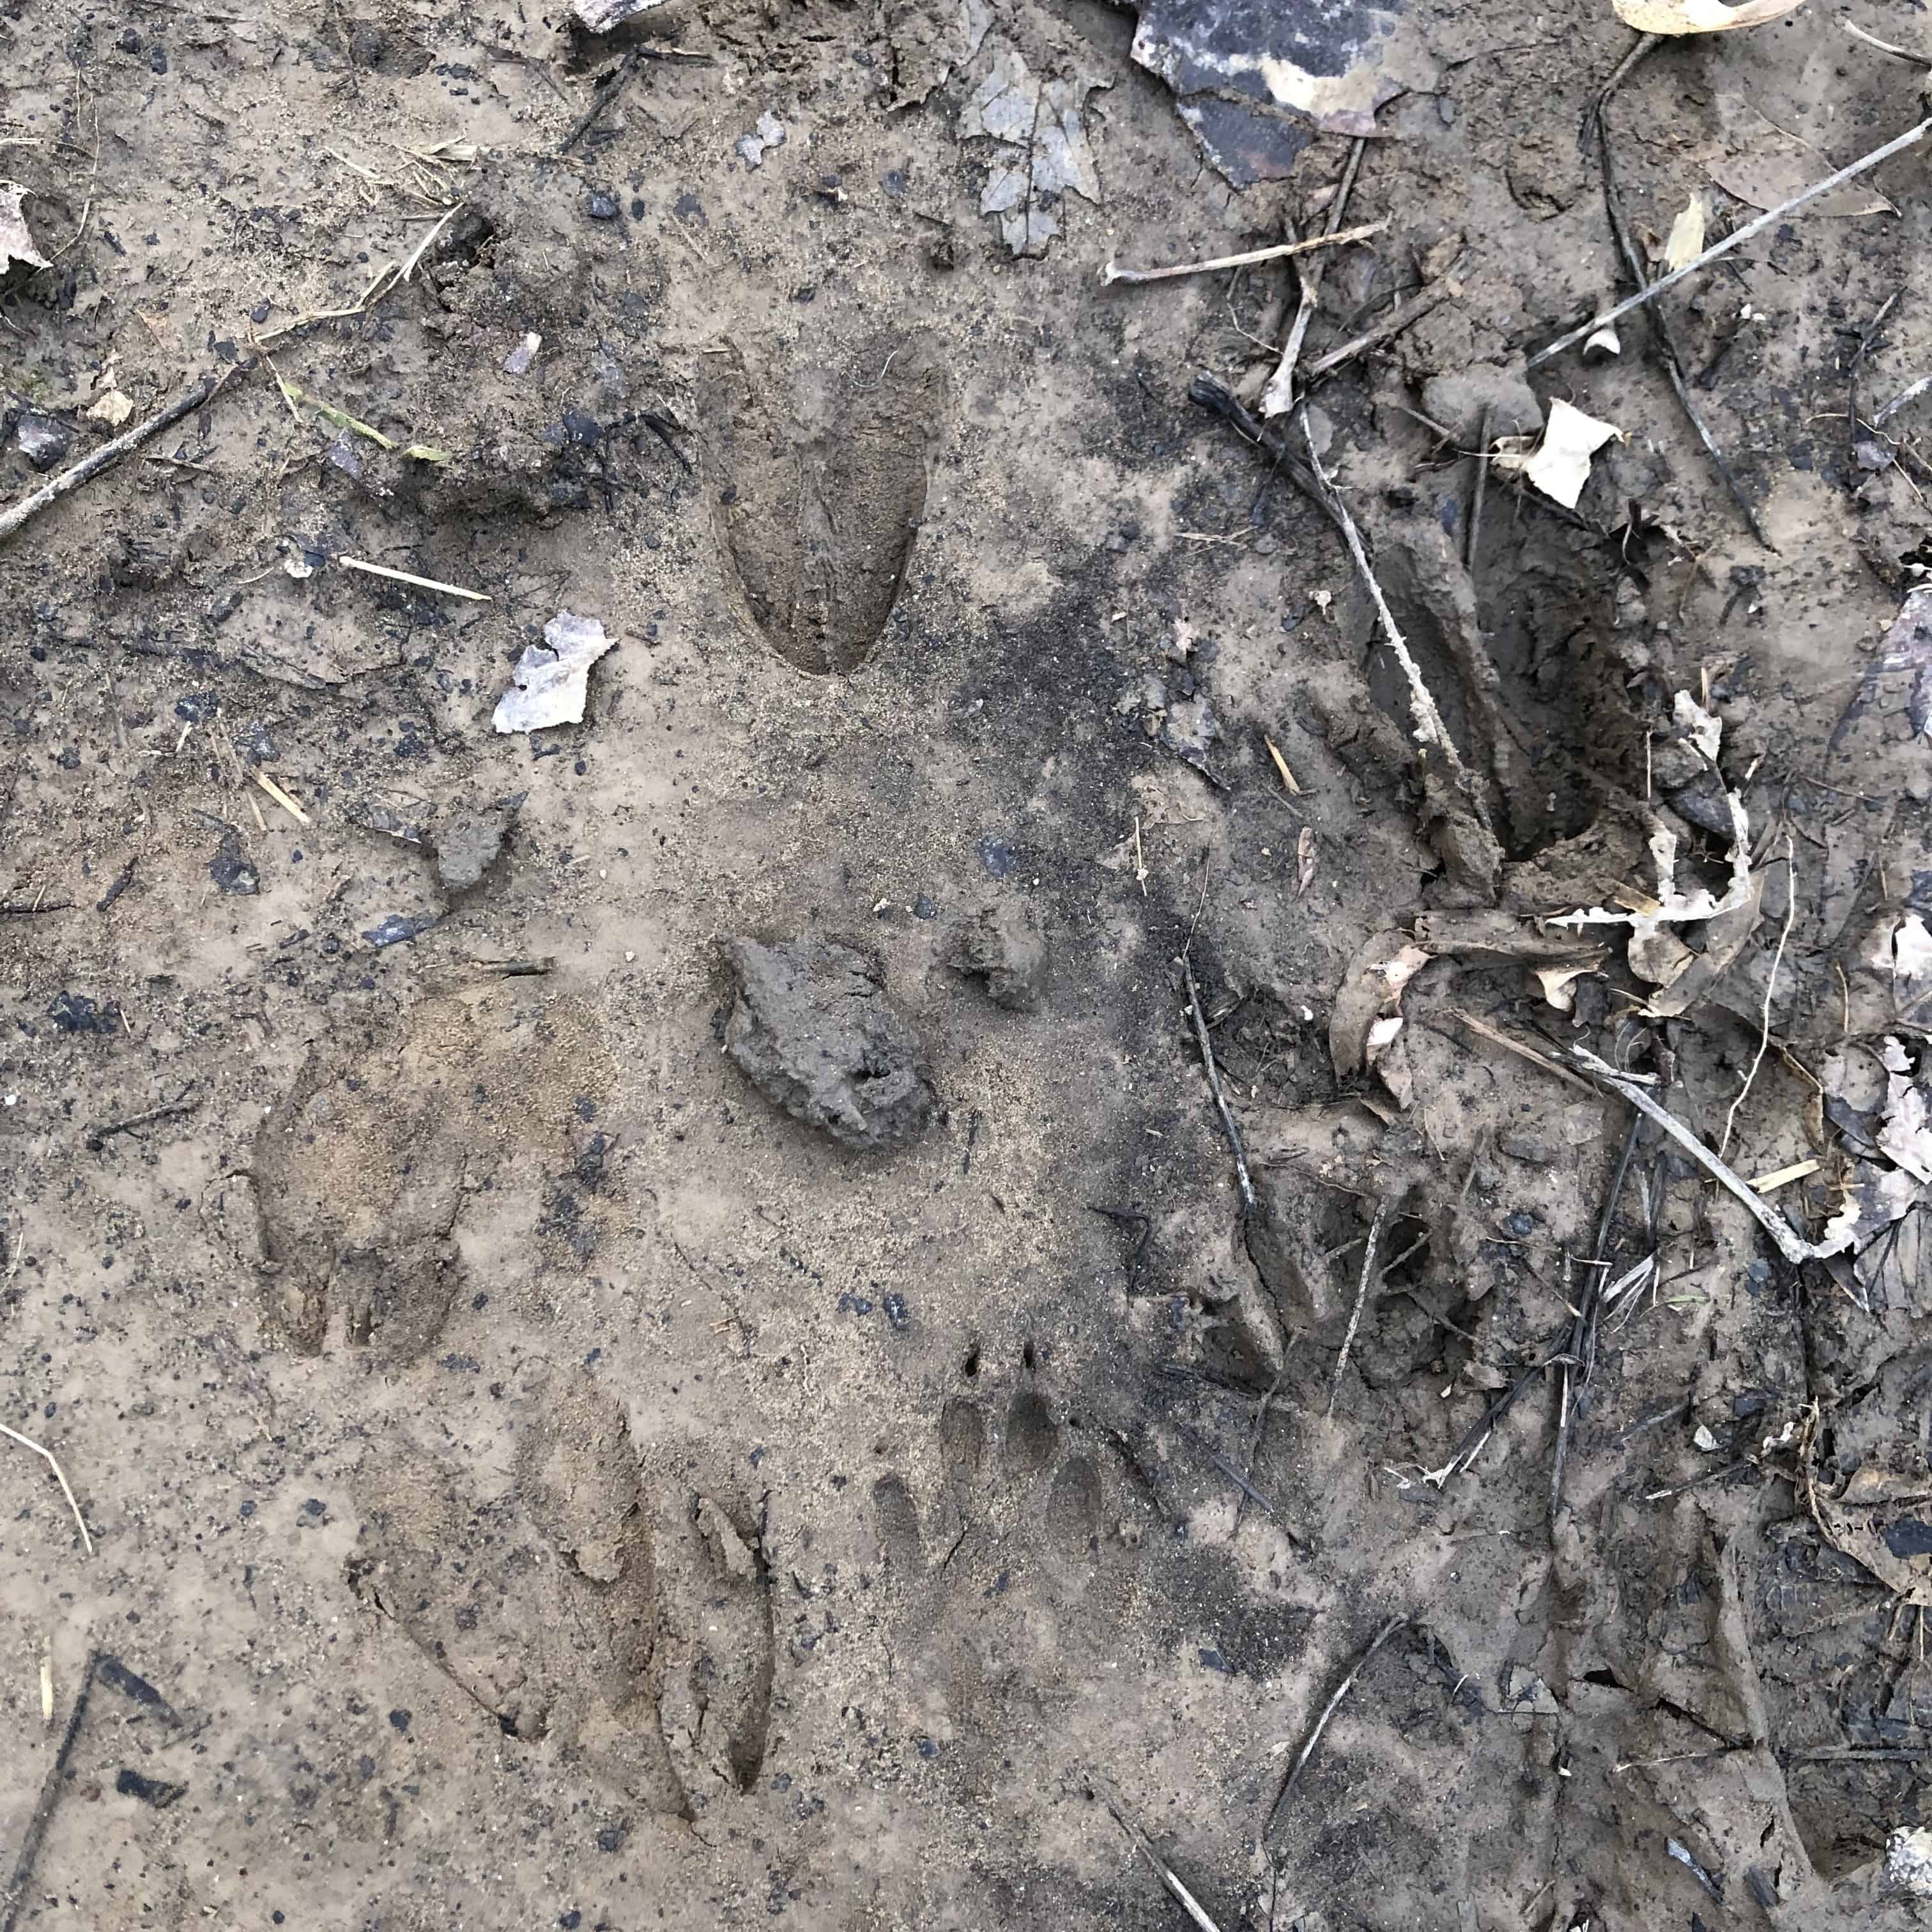 Animal tracks in the mud.